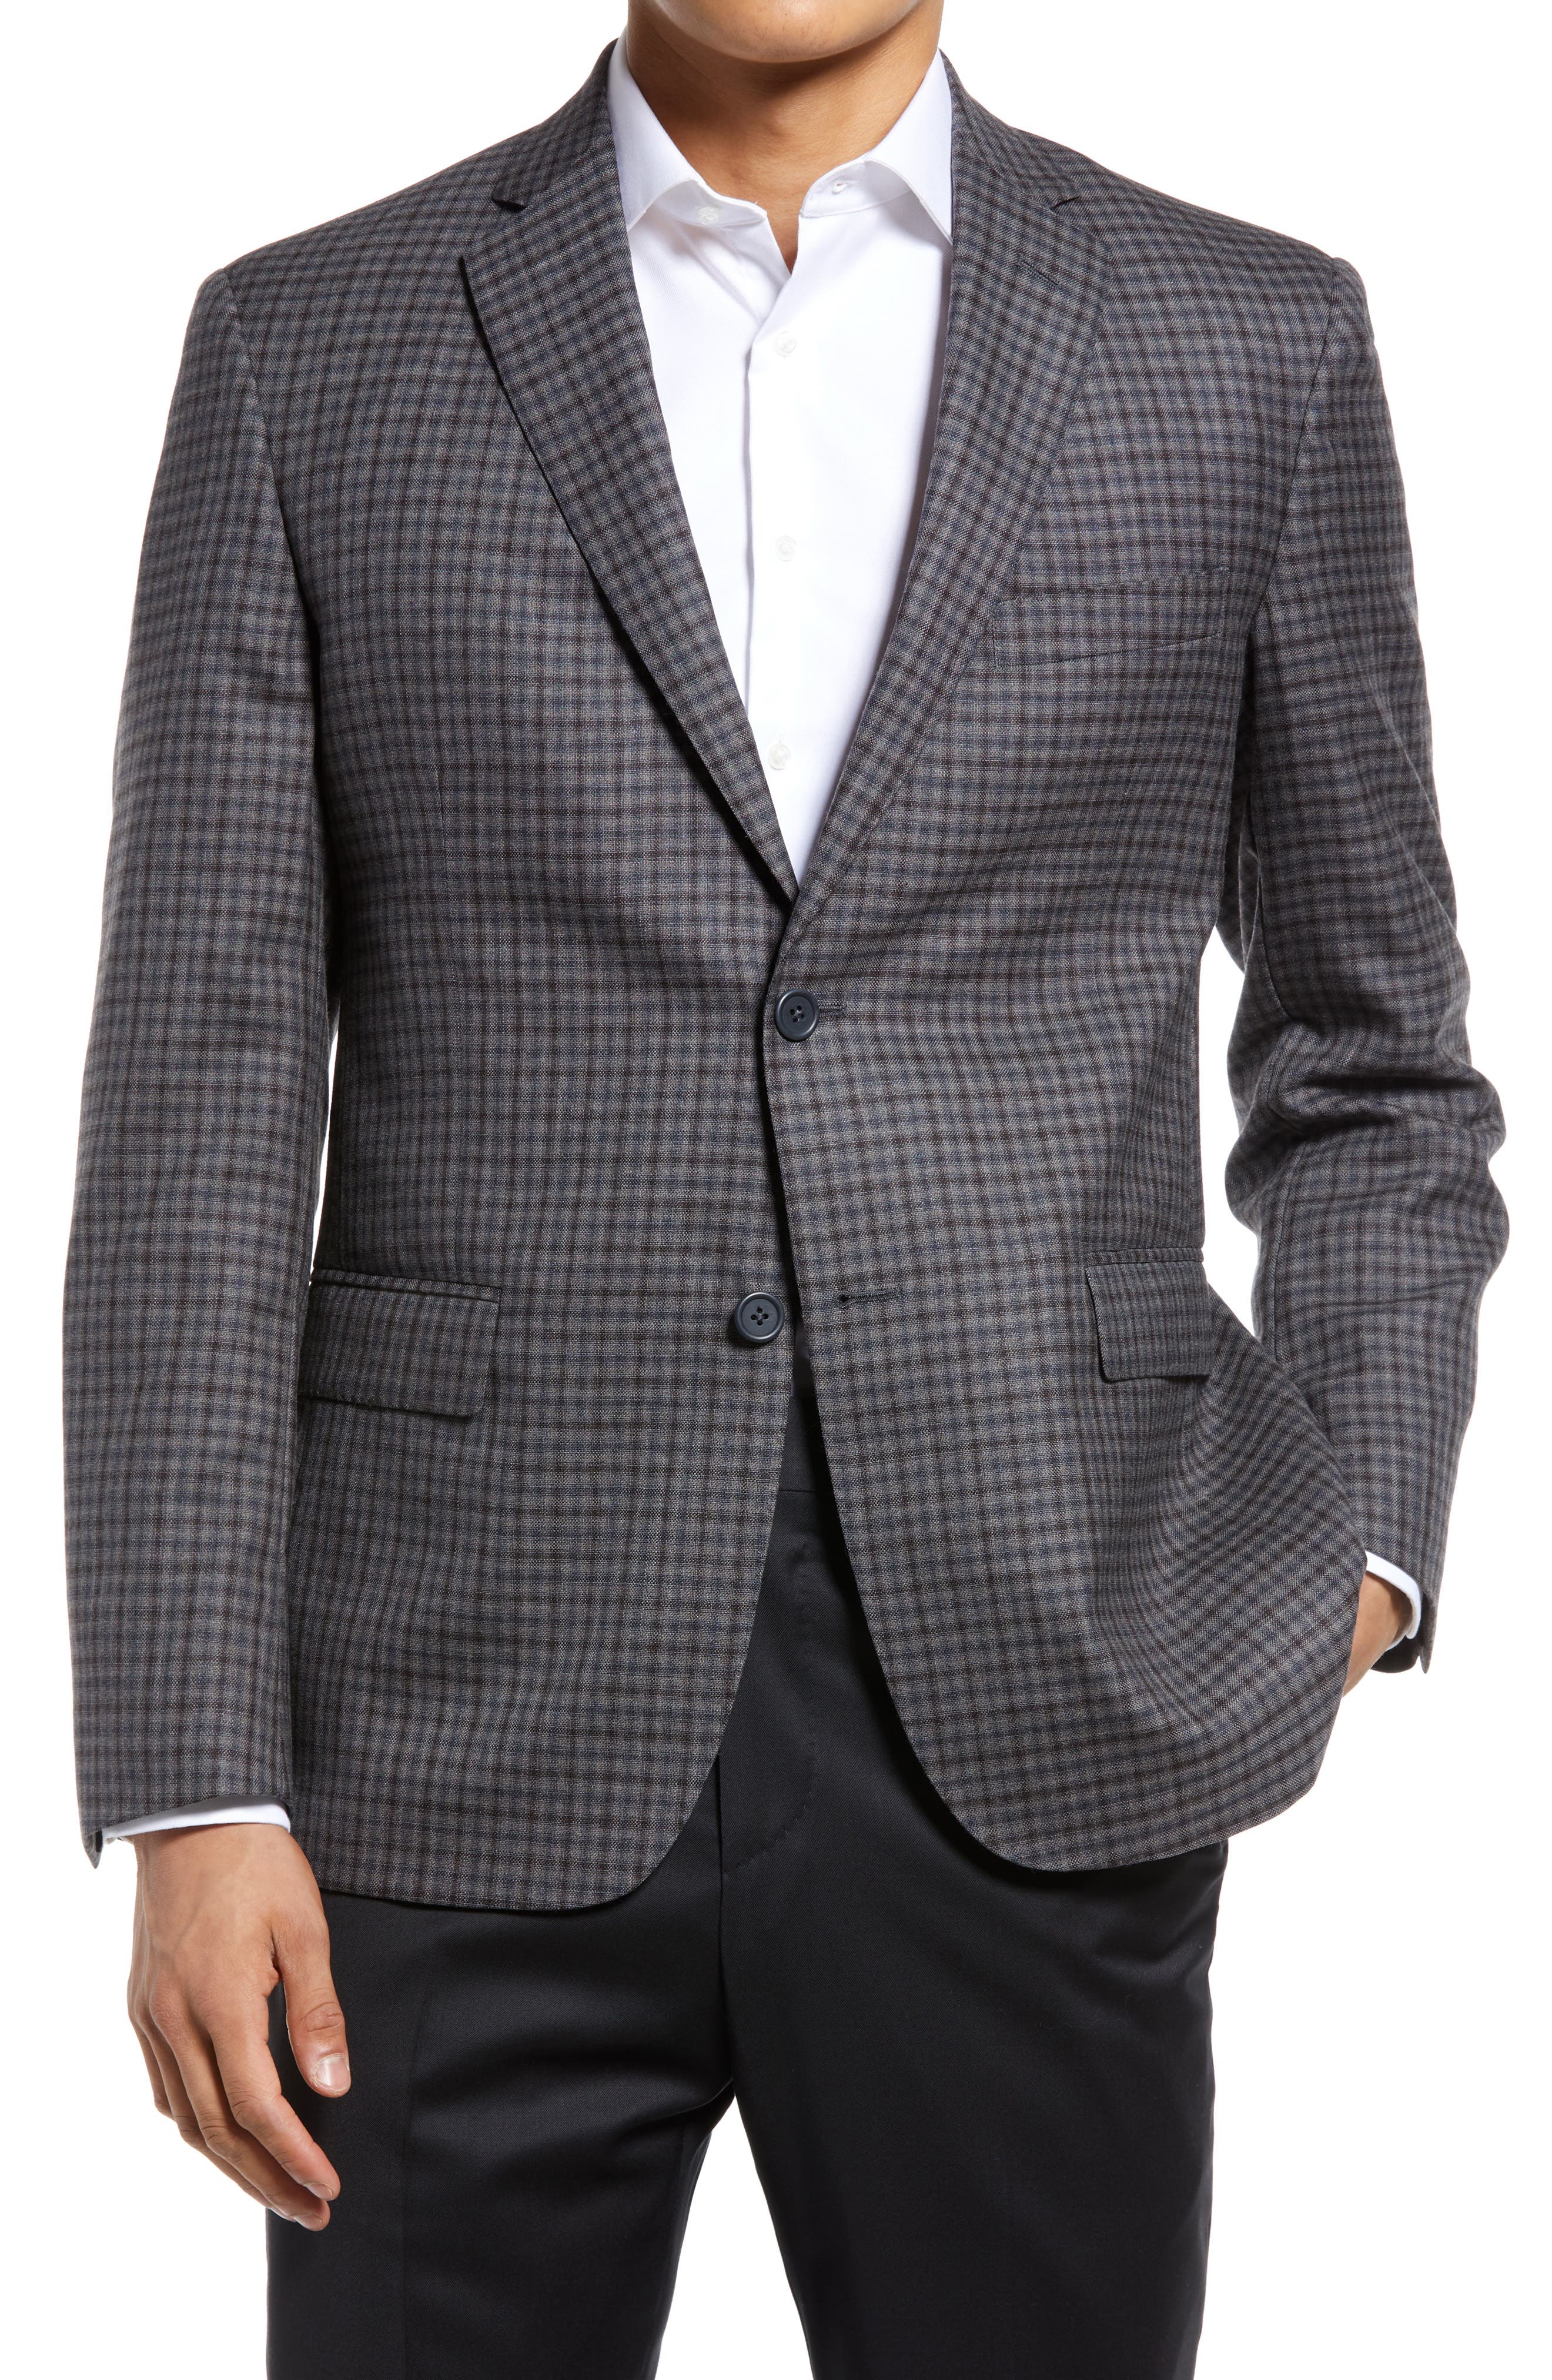 JB Britches Check Wool Sport Coat in Dark Taupe at Nordstrom